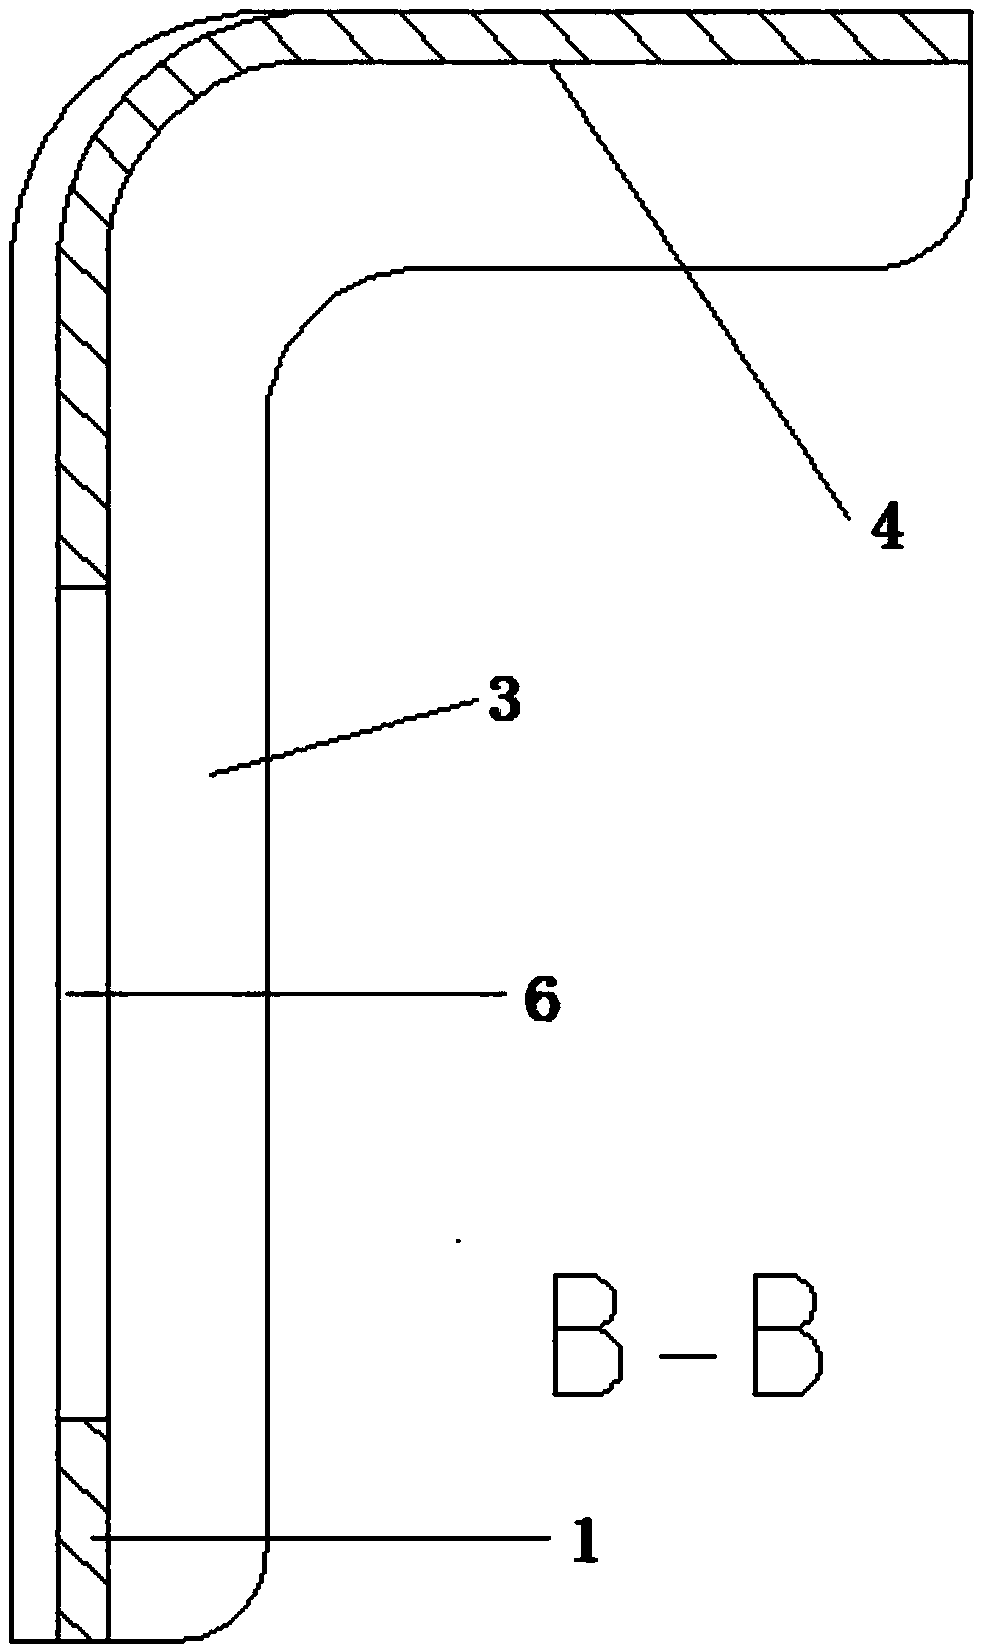 A limit baffle for bar-shaped lever lock of passenger car compartment door